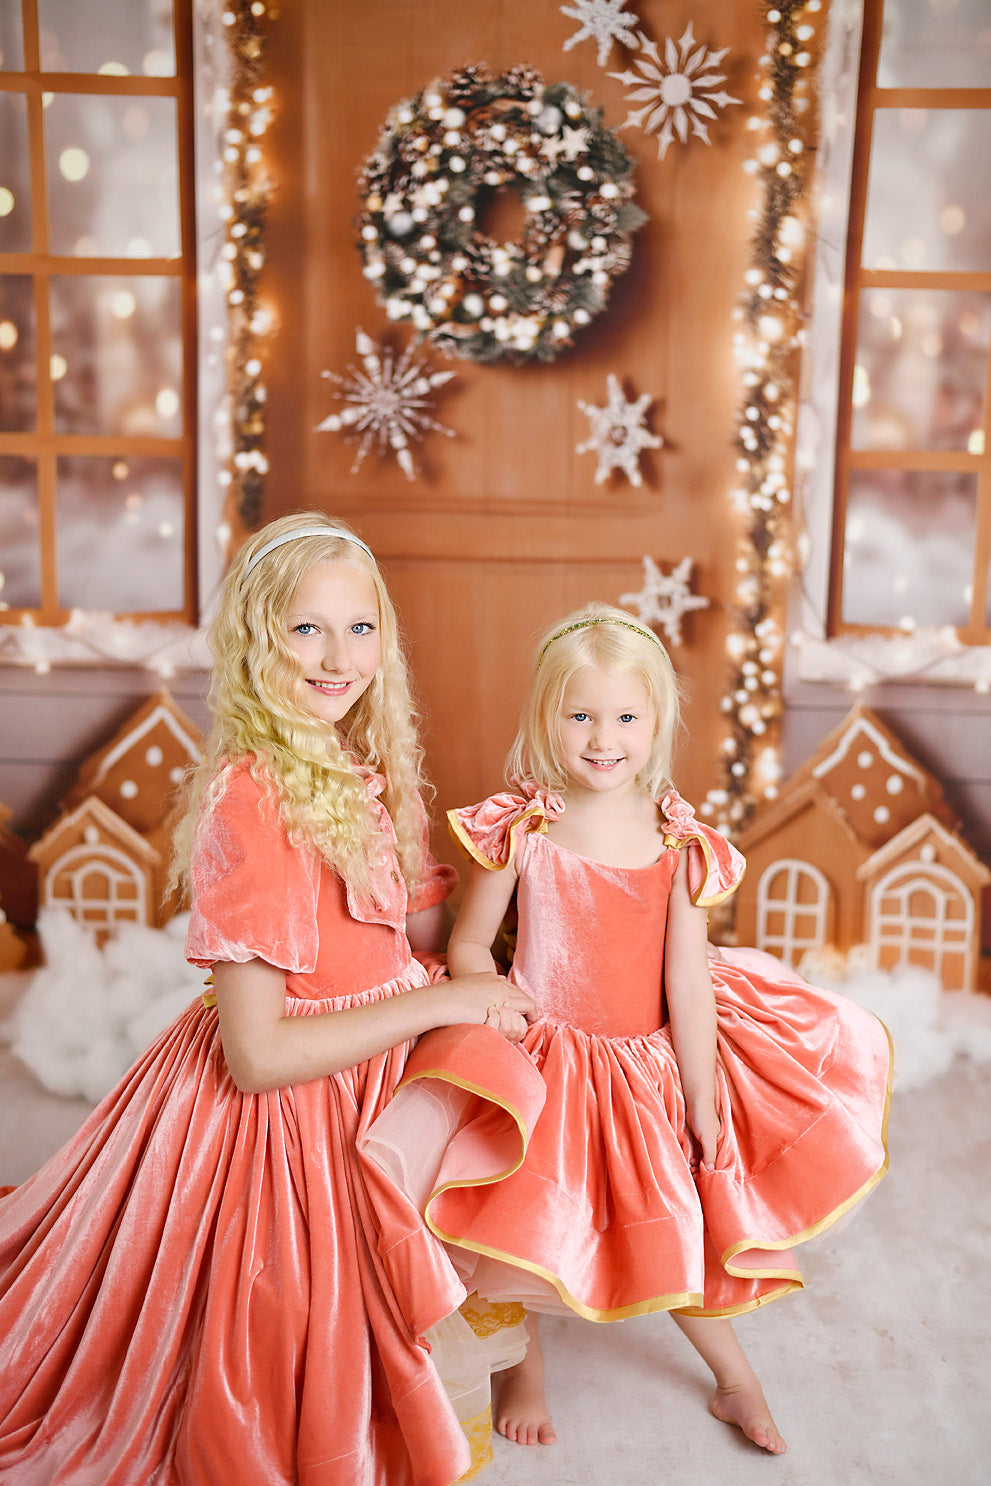 couture gown rental -  Holiday couture gown rental -perfect for photography sessions using babydream backdrops and other fine art drops.